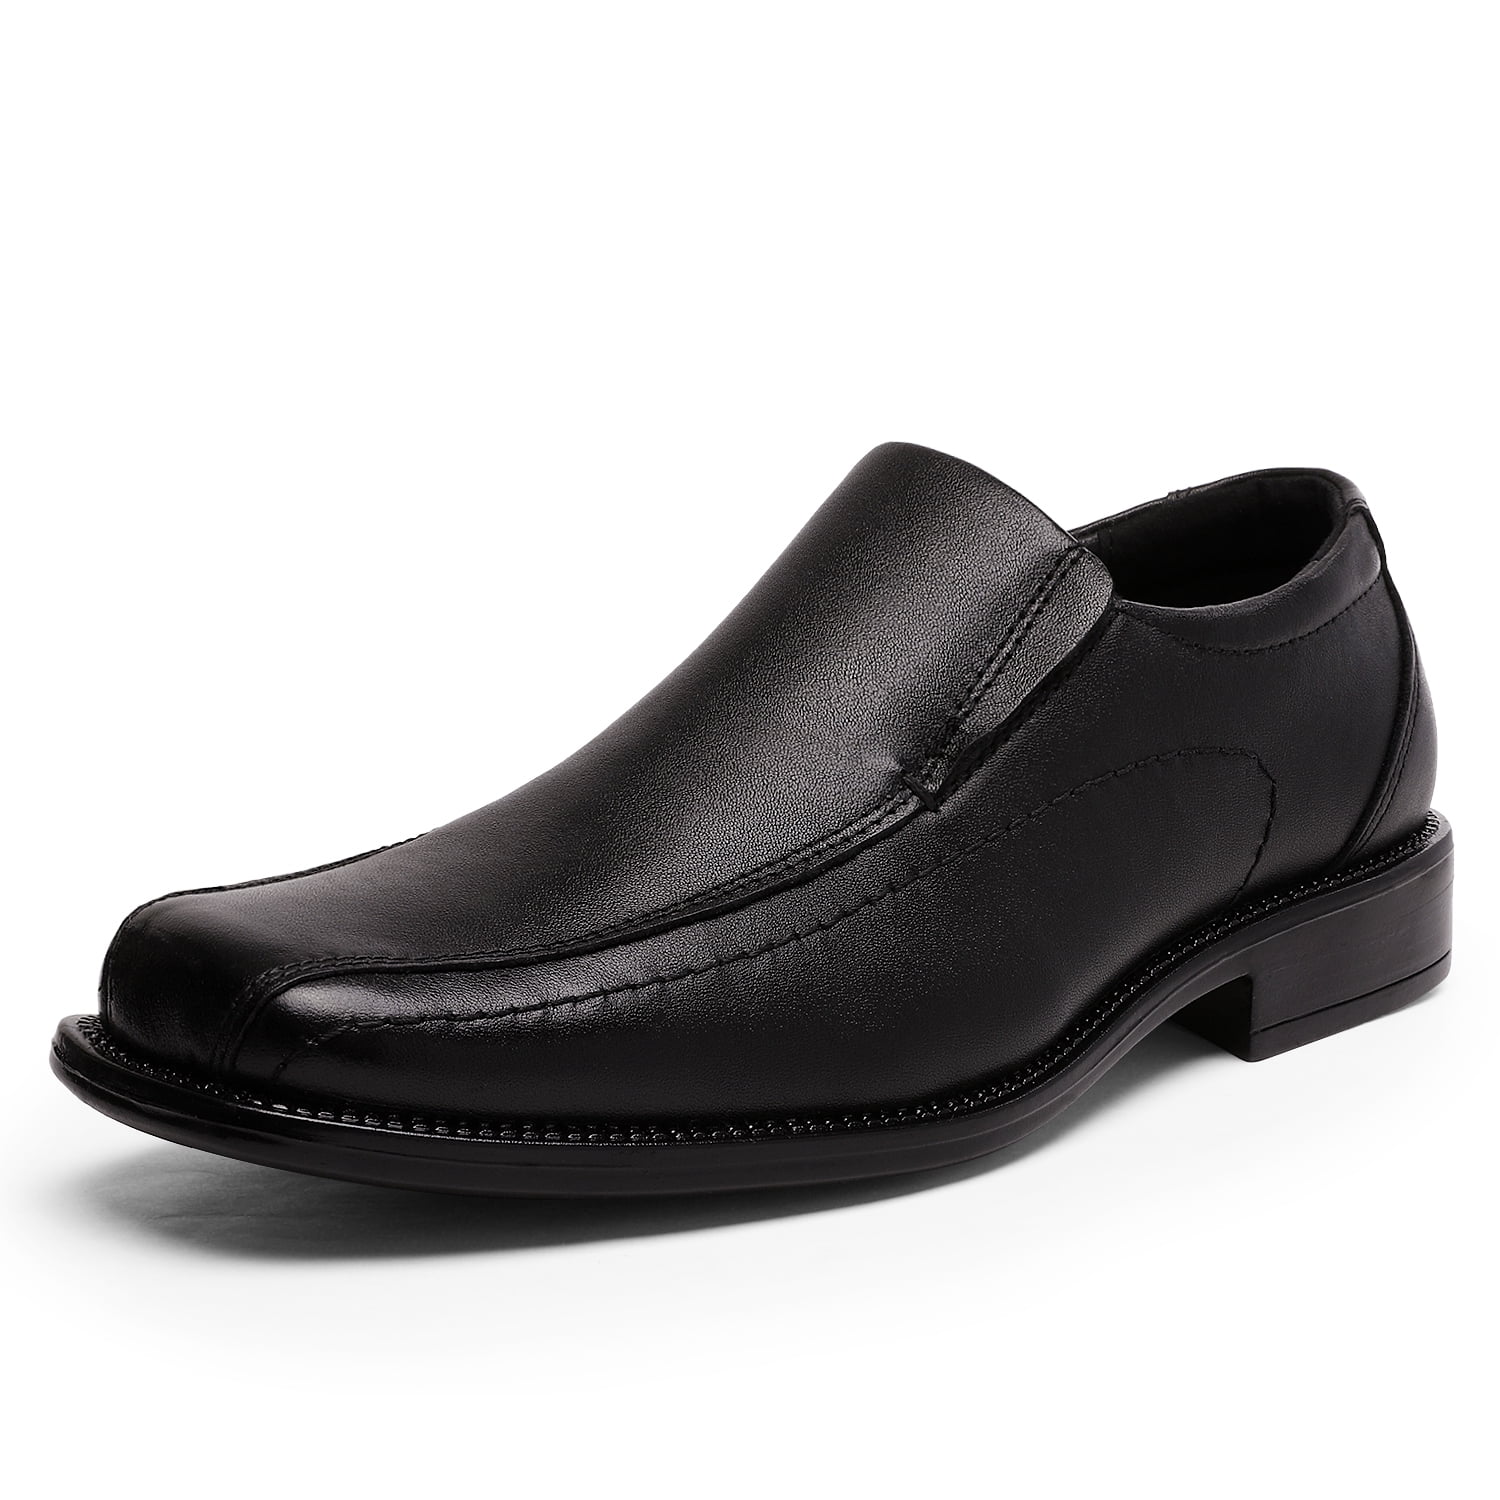 Male Loafers Slip on Genuine Leather Mens Business Shoes Black